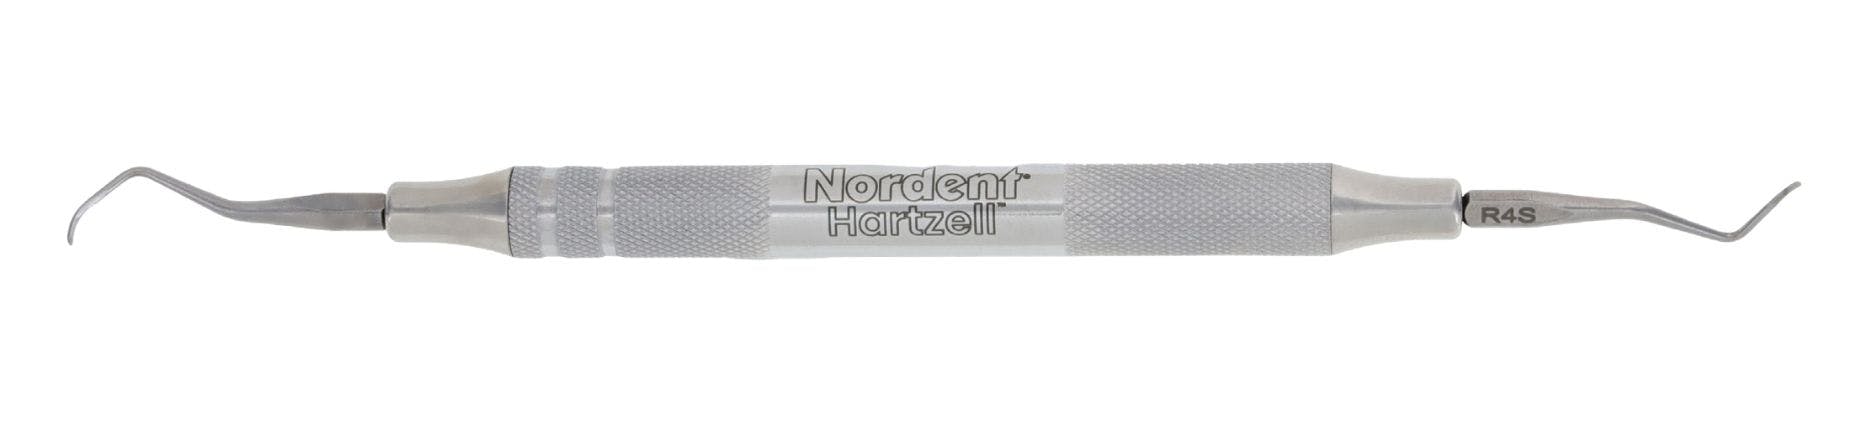 Popular Hartzell Scalers and Curettes Are Reintroduced by Nordent | Image Credit: © Nordent